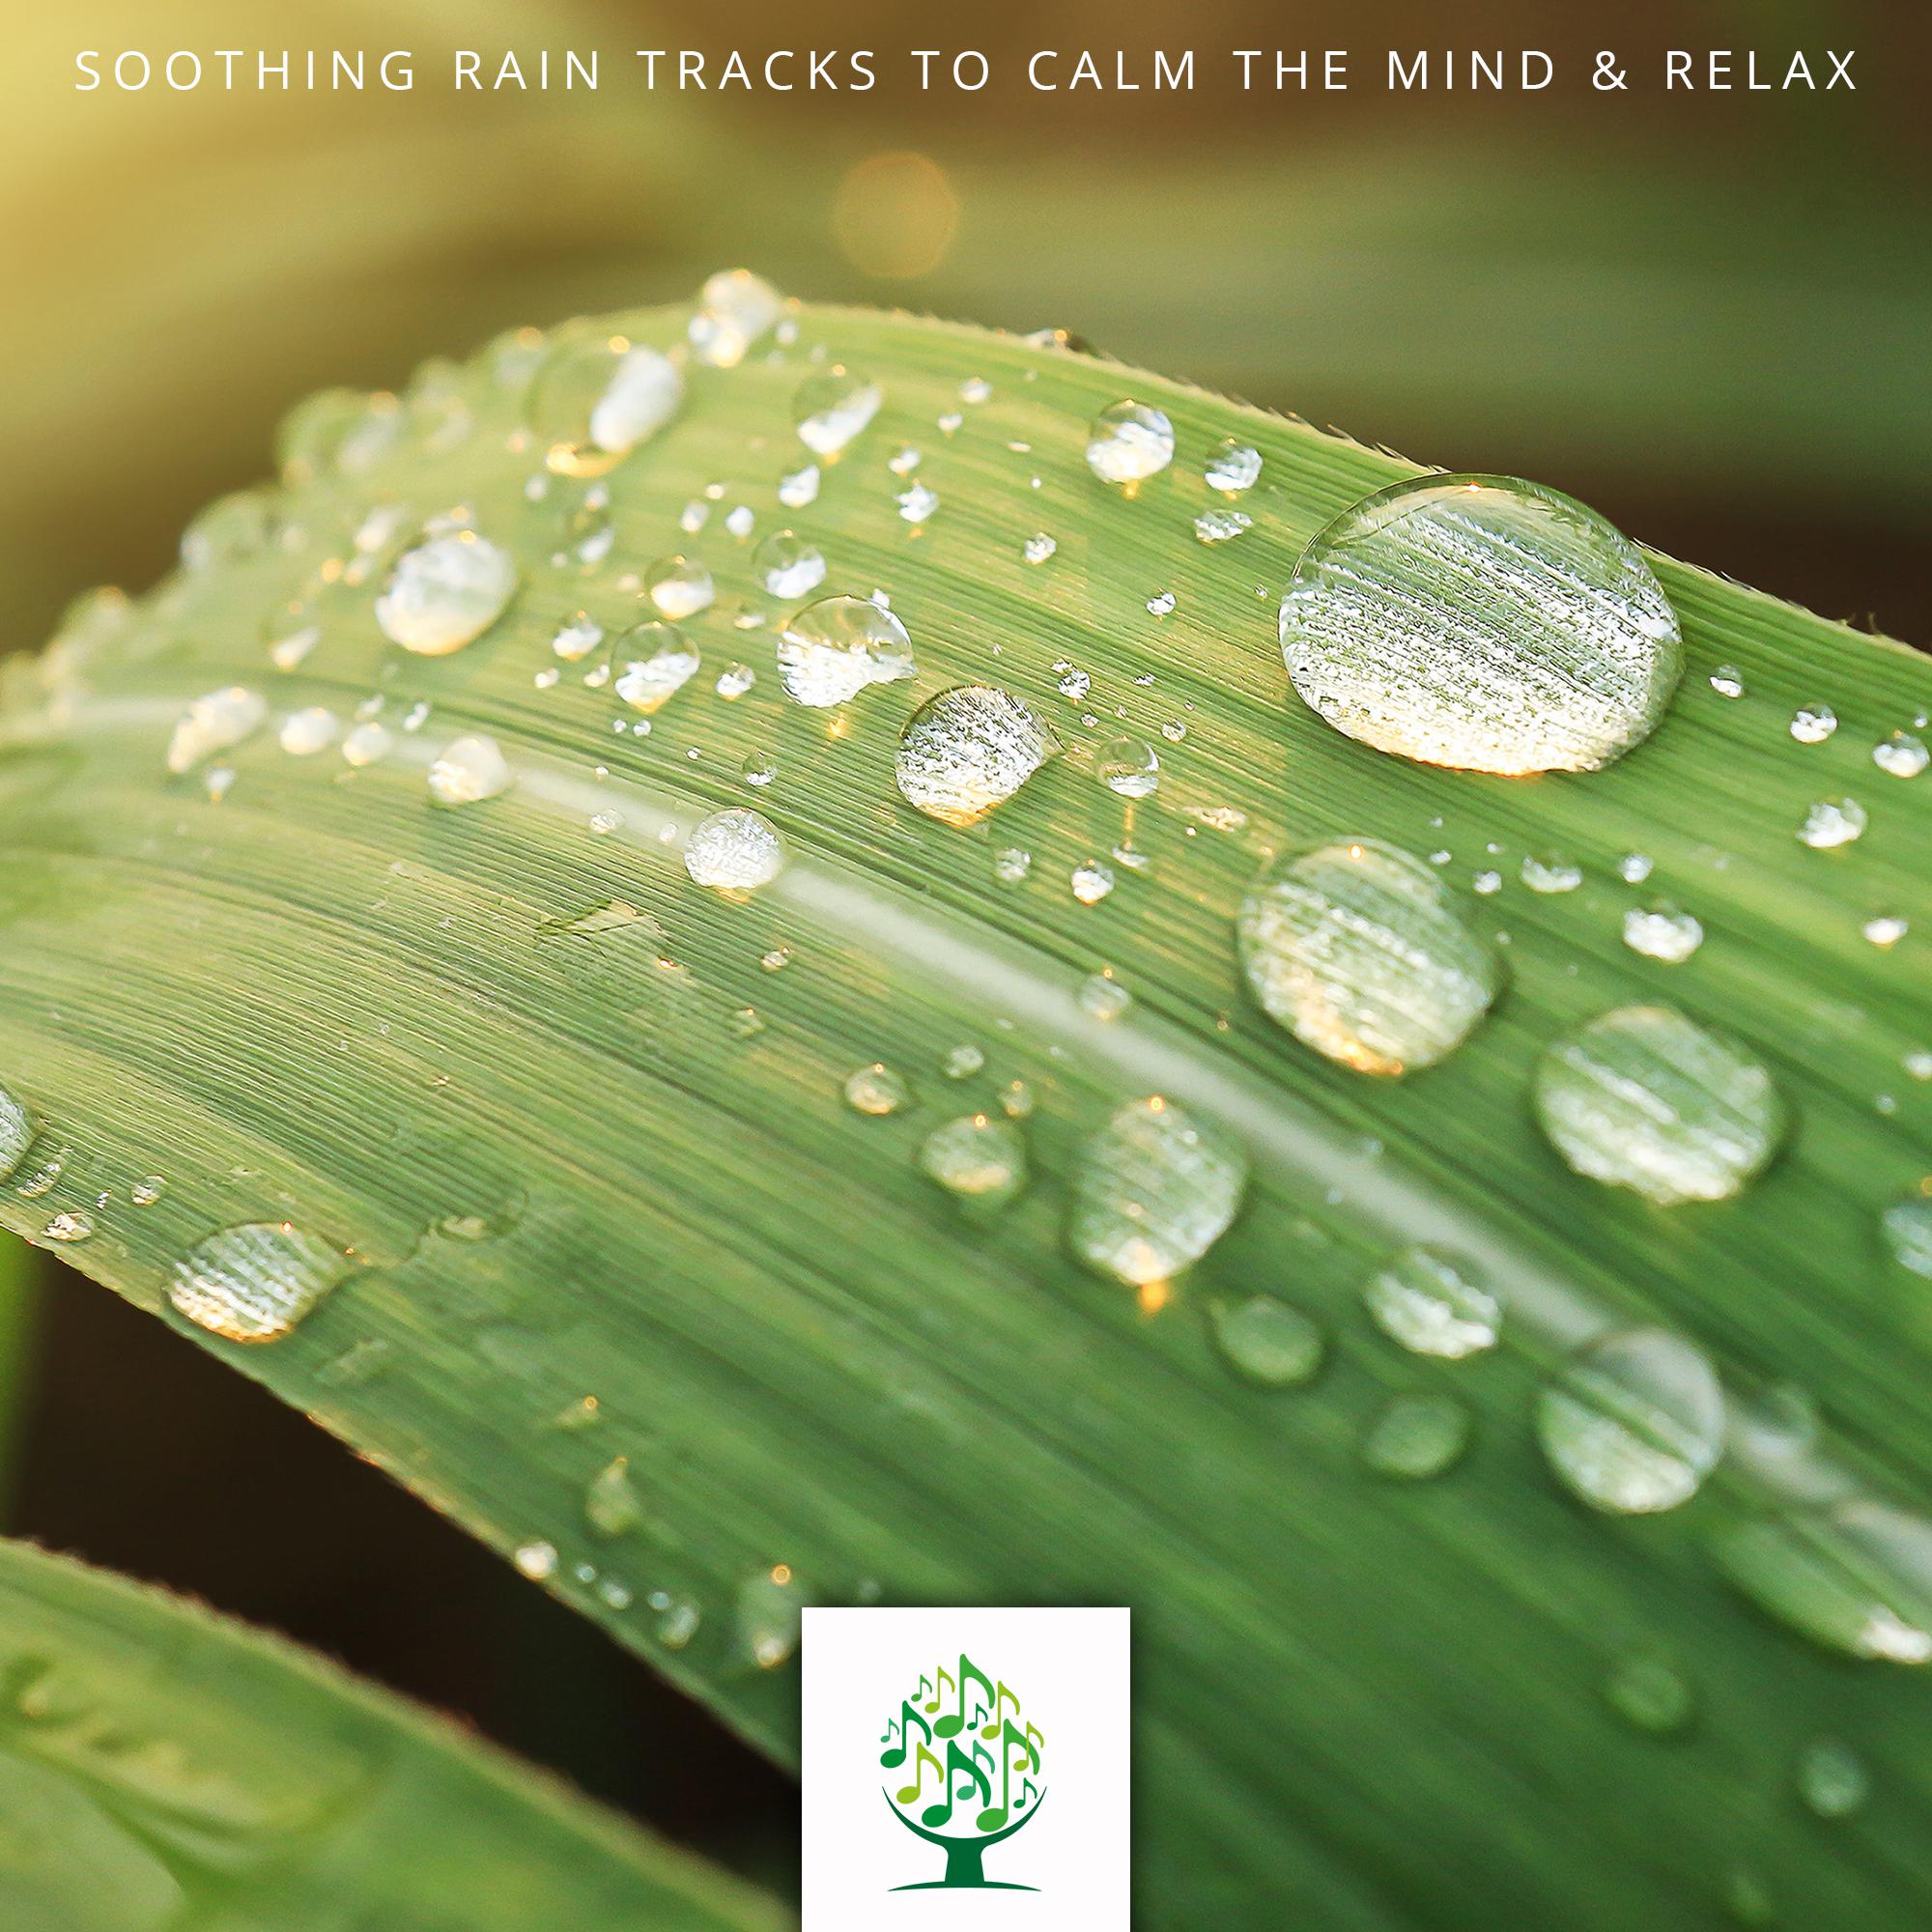 Soothing Rain Tracks to Calm the Mind & Relax